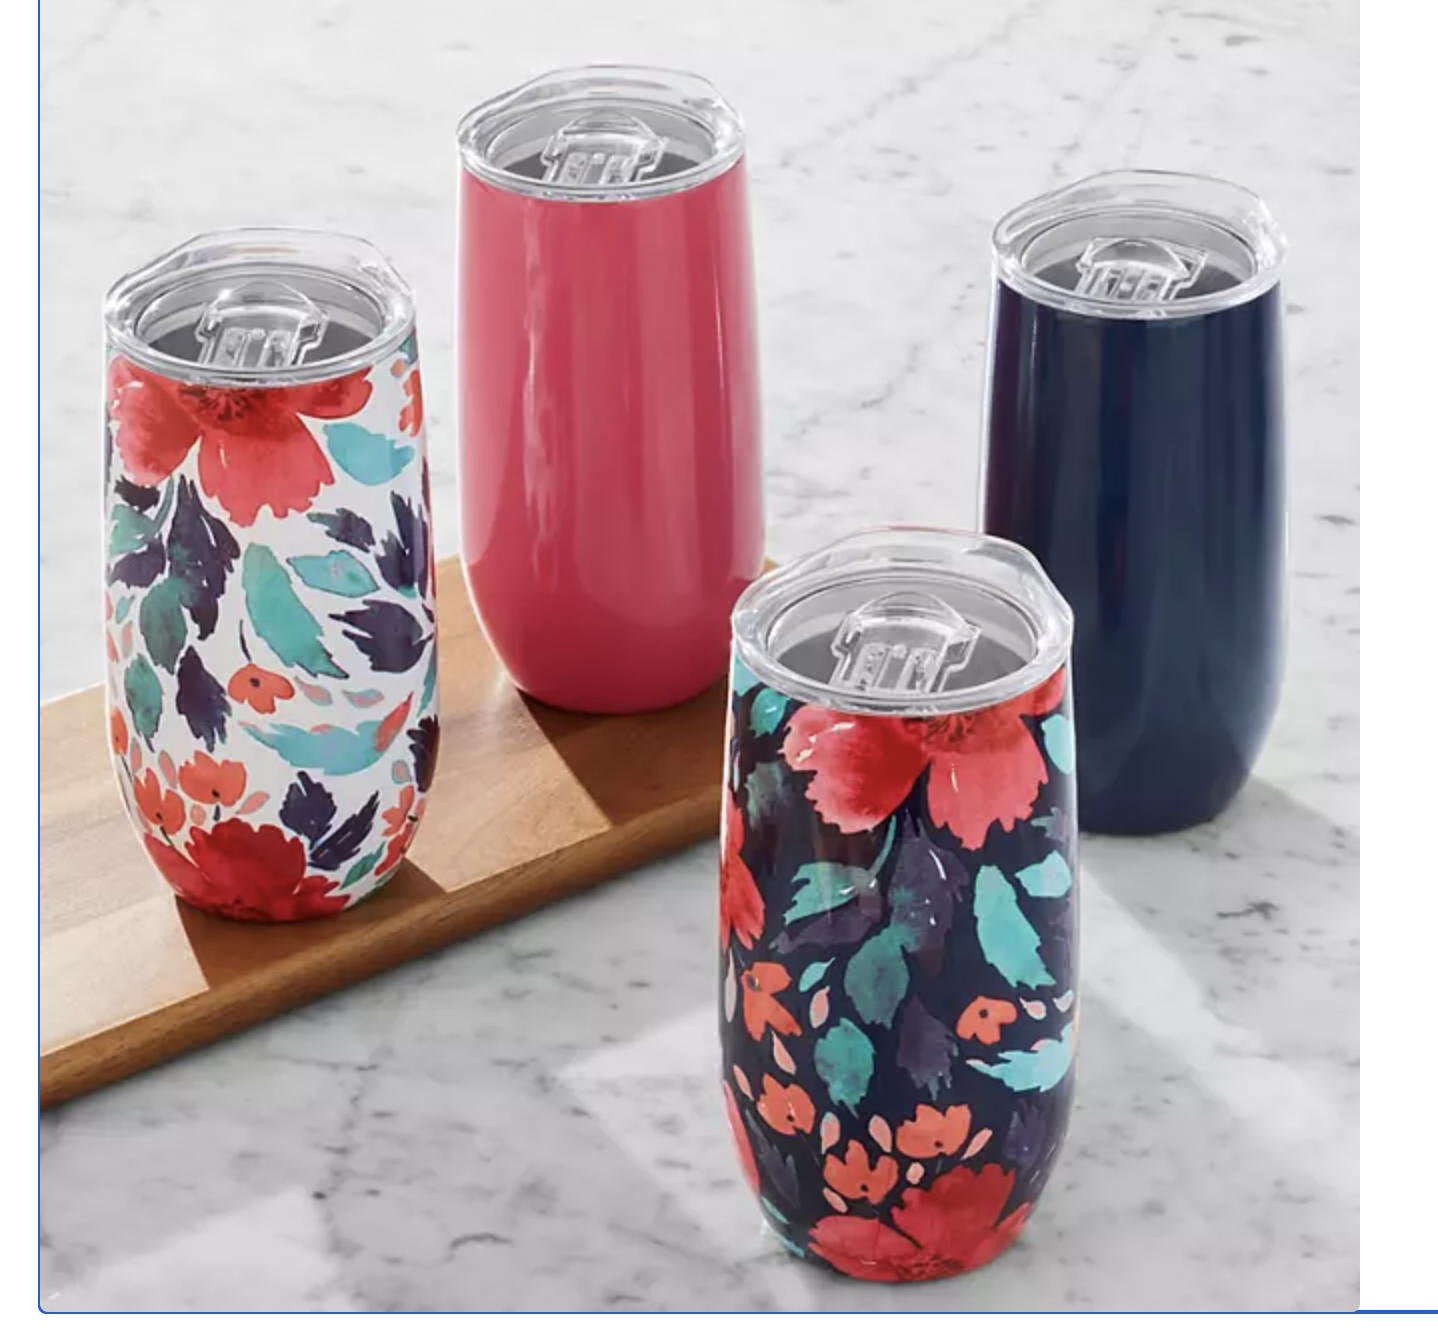 Member’s Mark 14-oz. Stainless Steel Insulated Tumblers Pack $19.98